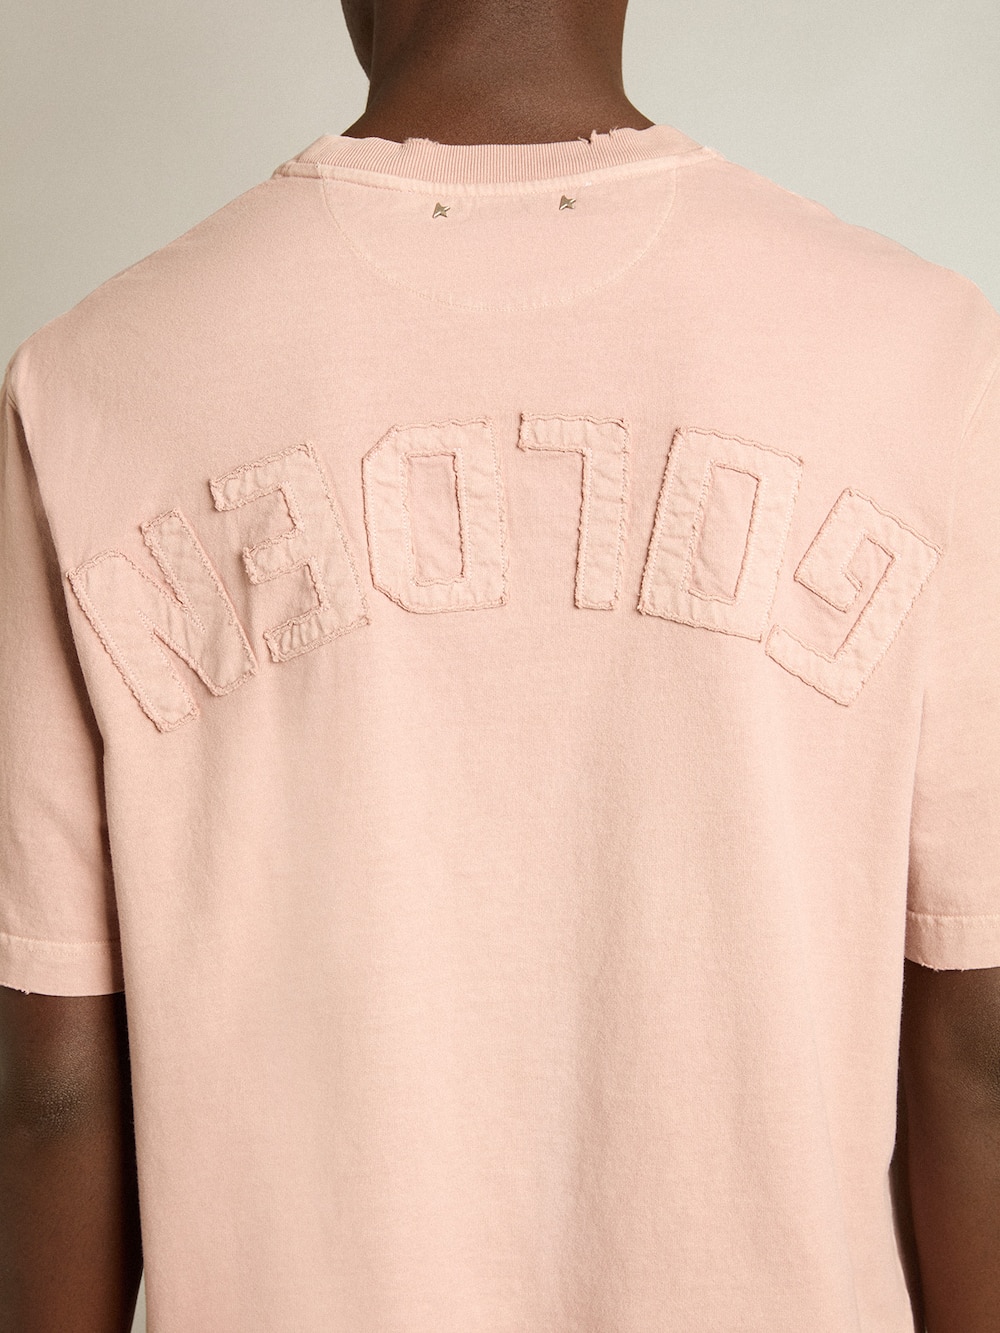 Golden Goose - Powder-pink T-shirt with reverse logo on the back - Asian fit in 